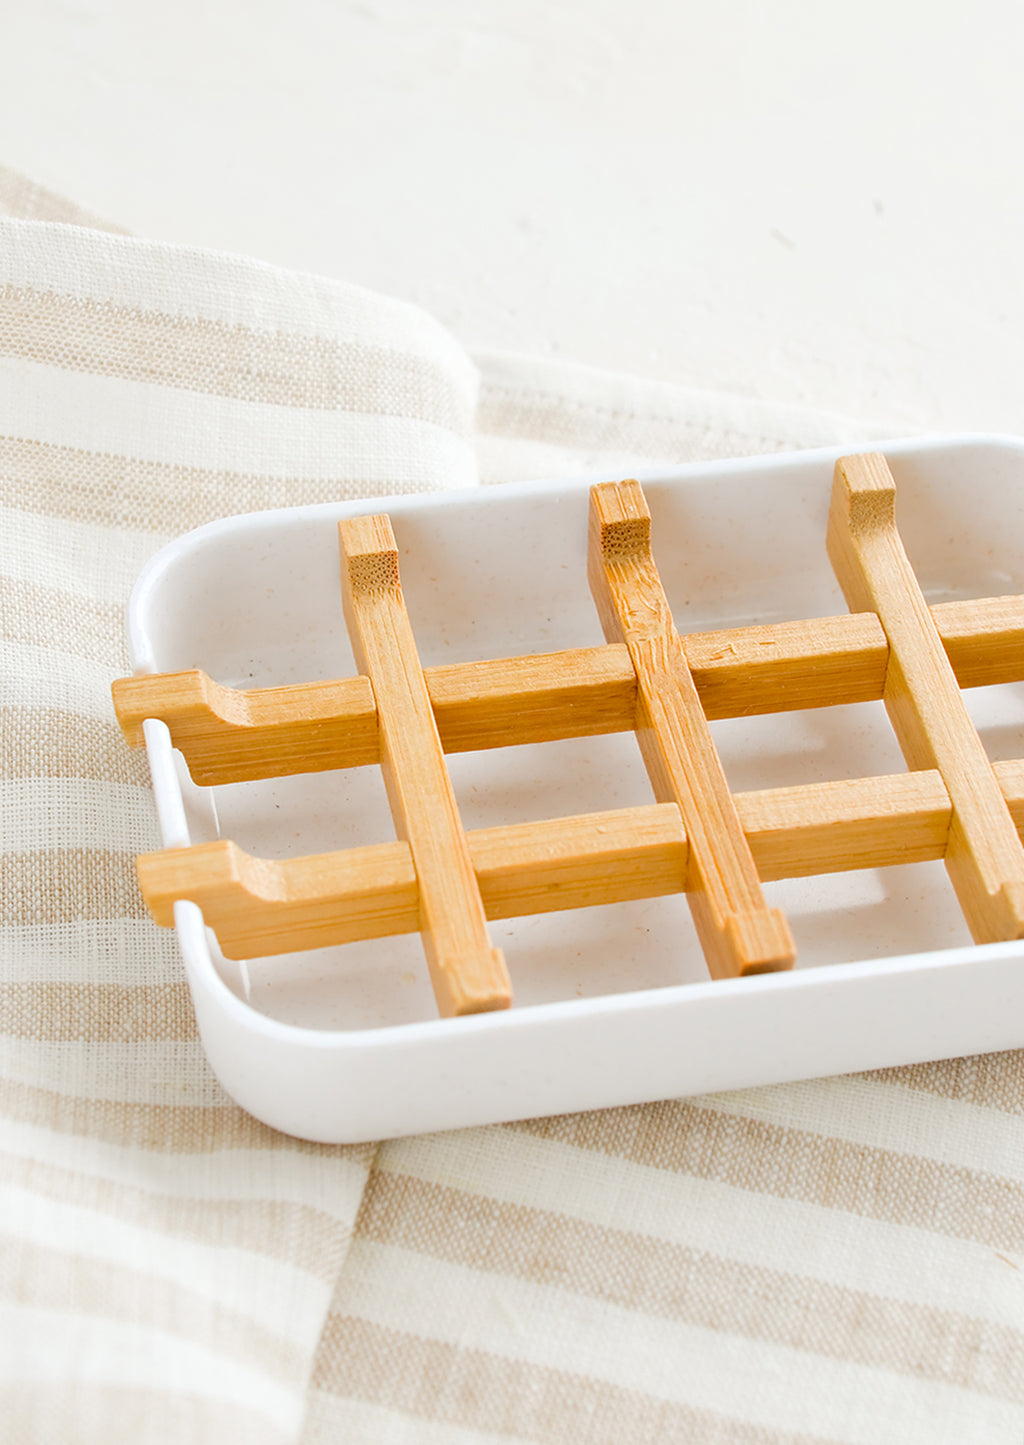 2: A white soap dish with built-in bamboo drainage tray.